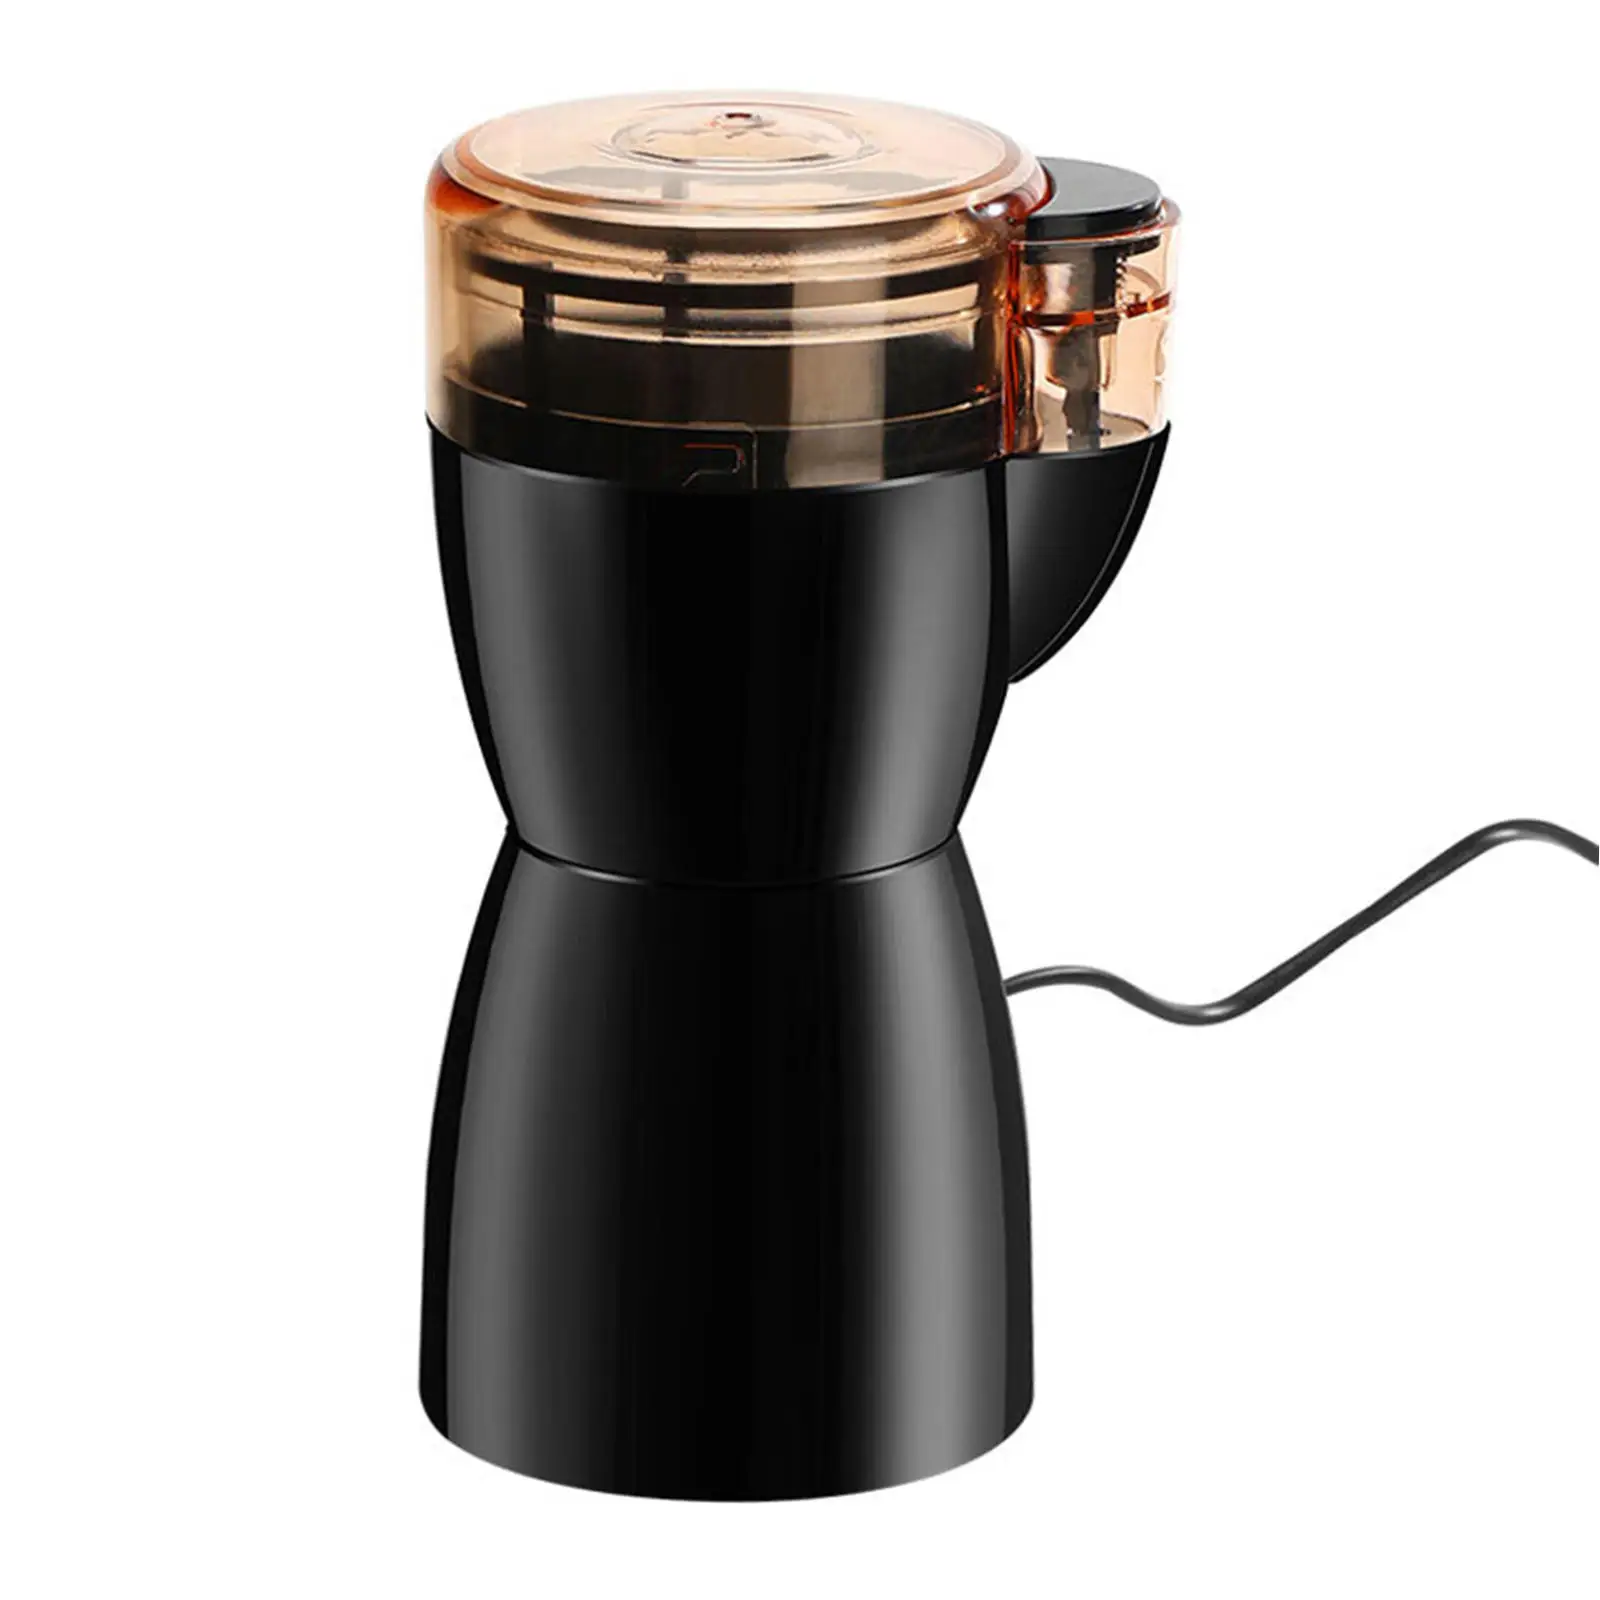 

220V Coffee Grinder Coffee Bean Mill Rechargeable Compact Beans Nut Grind Spice Crusher for Home Office Kitchen